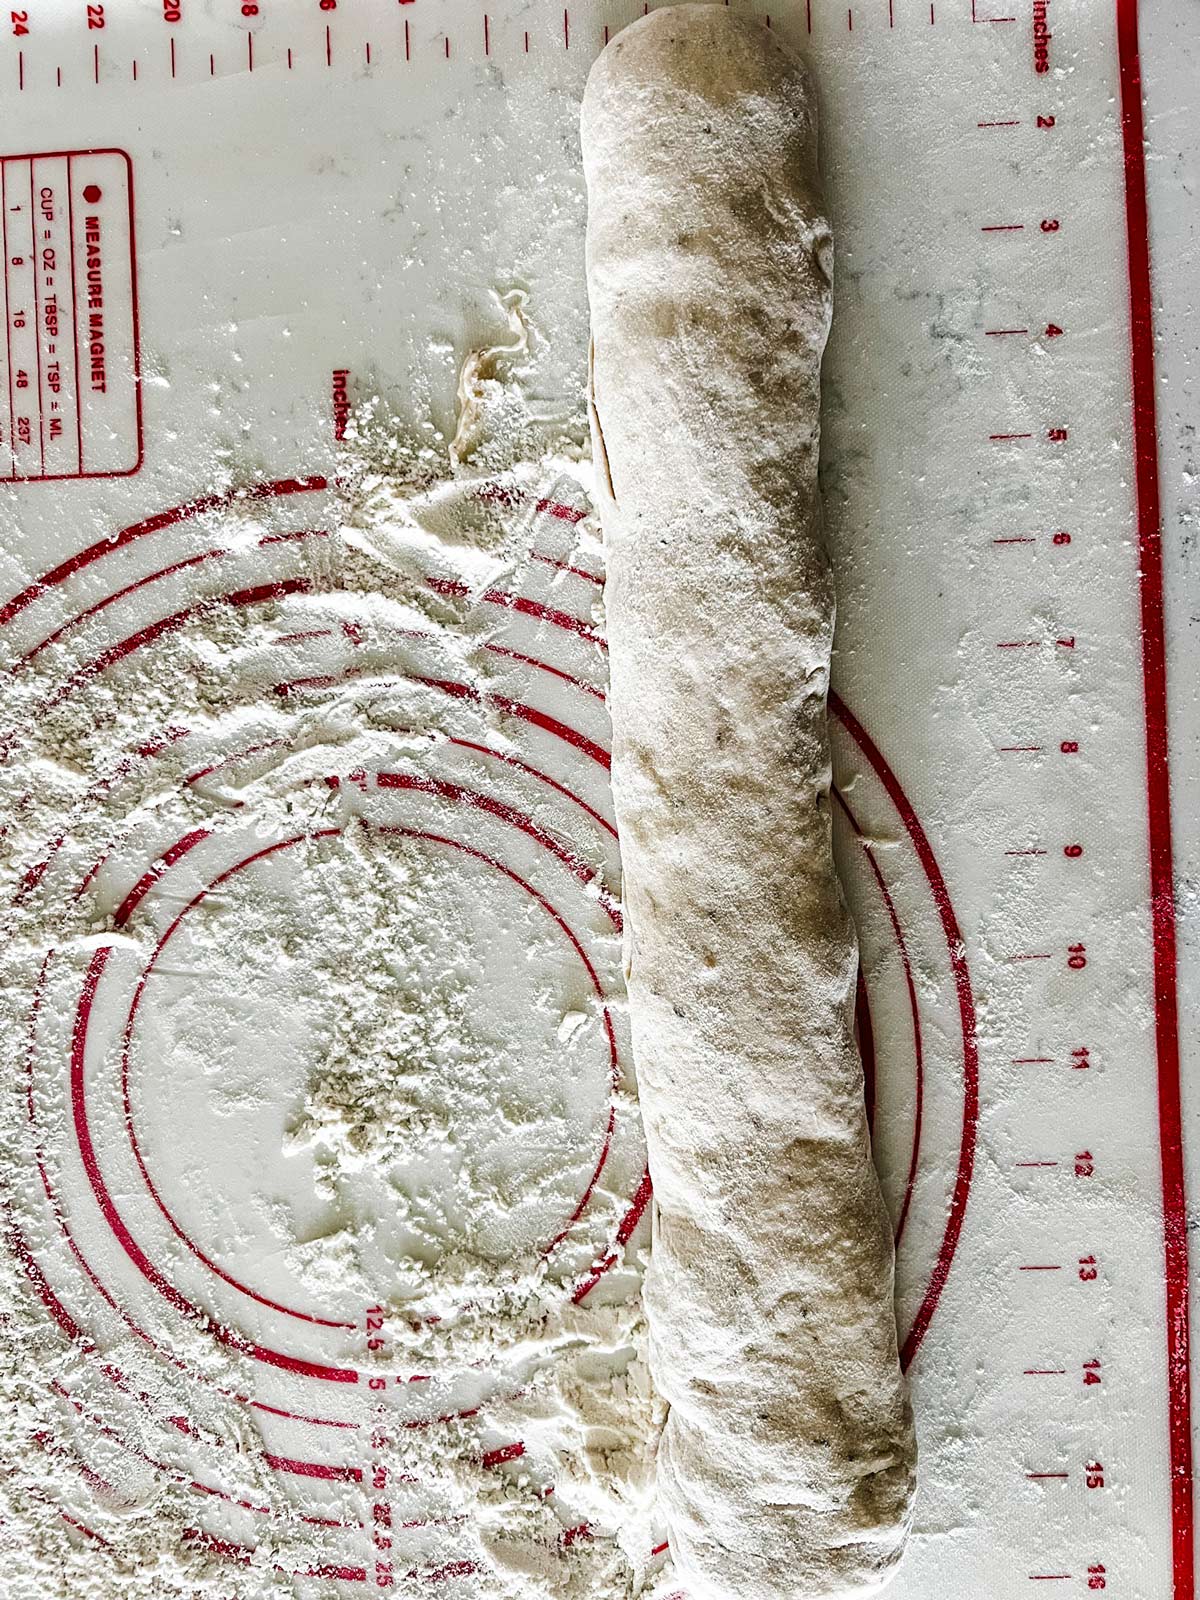 Bread dough rolled into a cylinder.